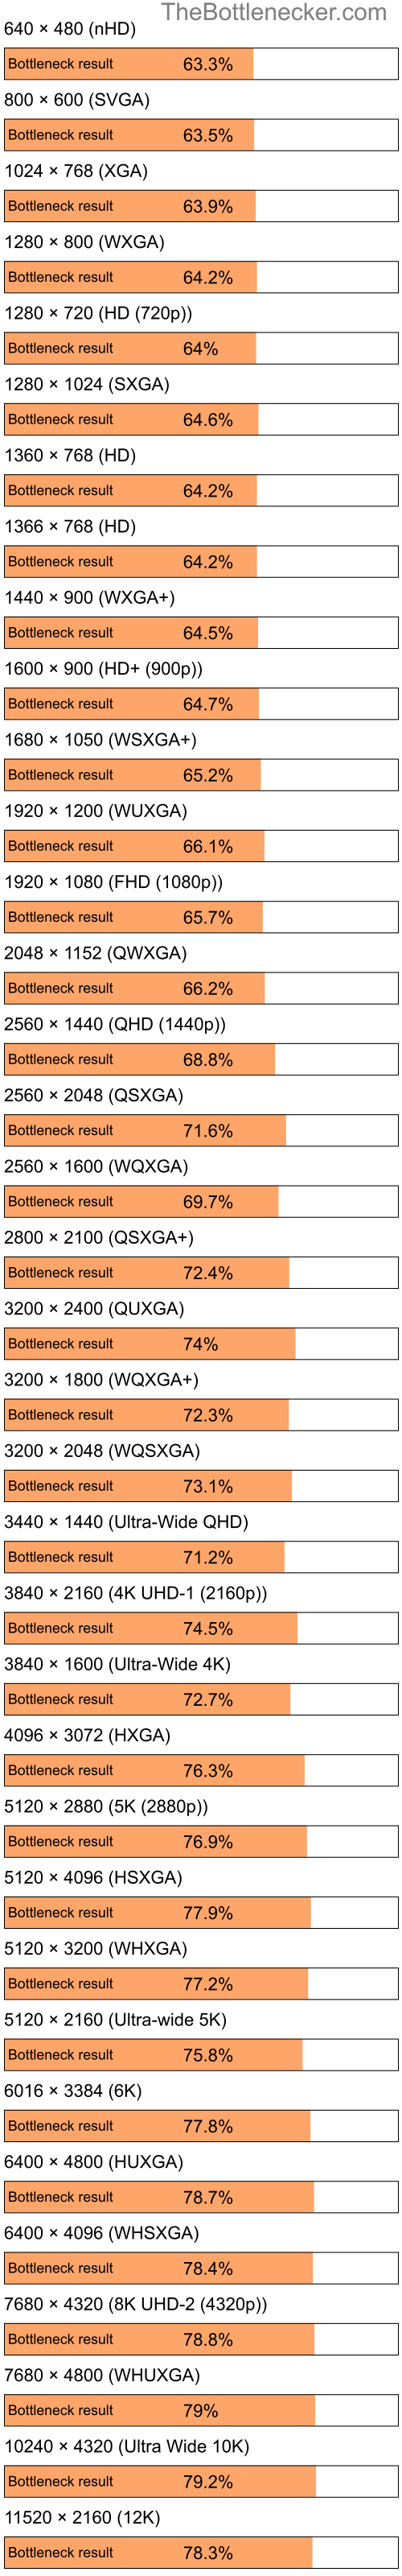 Bottleneck results by resolution for Intel Celeron M 410 and AMD Mobility Radeon HD 4200 in General Tasks